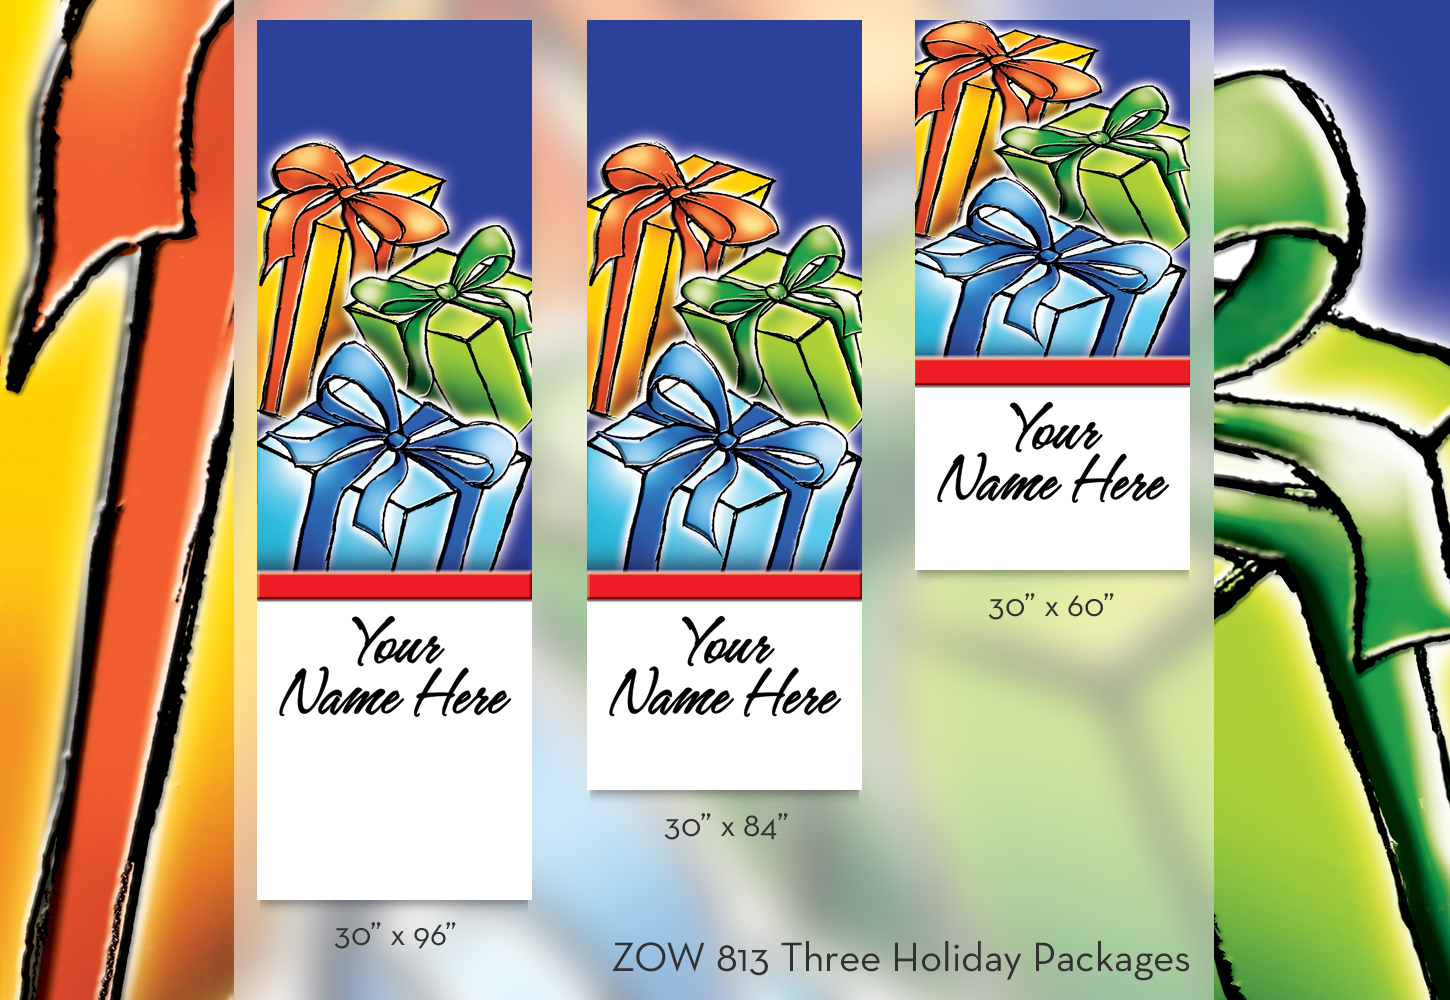 ZOW 813 Three Holiday Packages